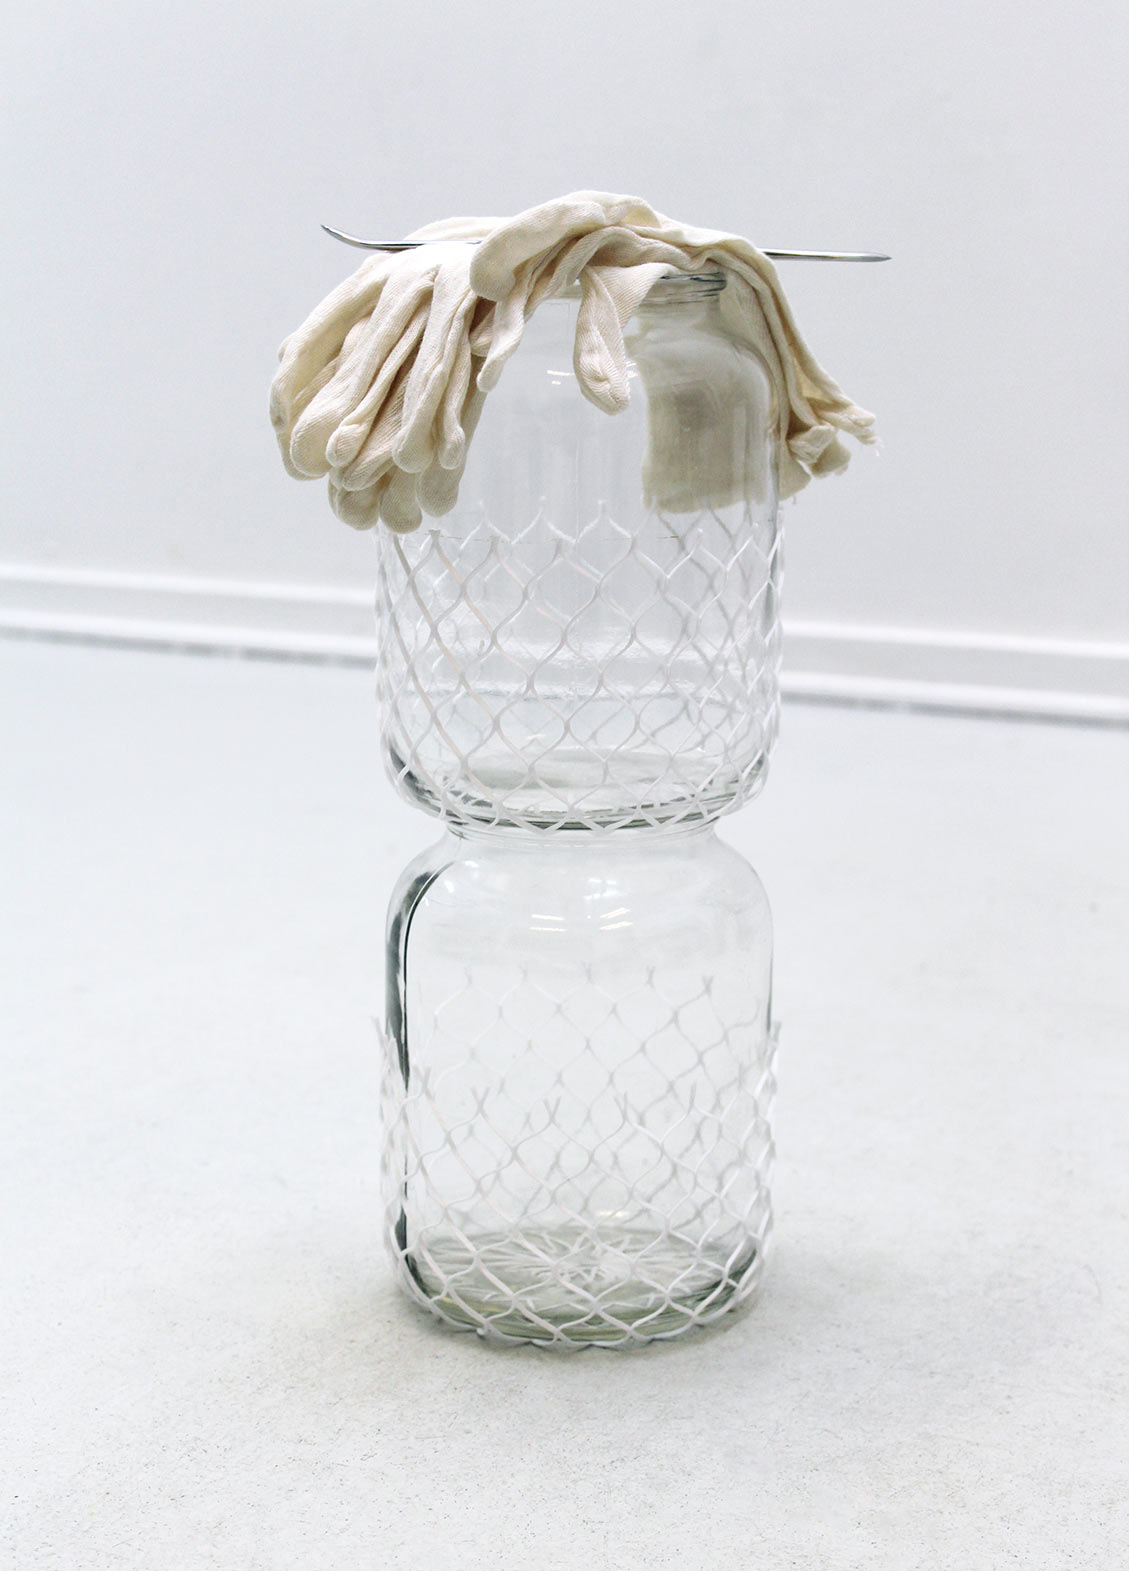 Gather, 2017, glass jars, protective sleeves, used cotton gloves, burnisher, cm. 48 x 20 x 20